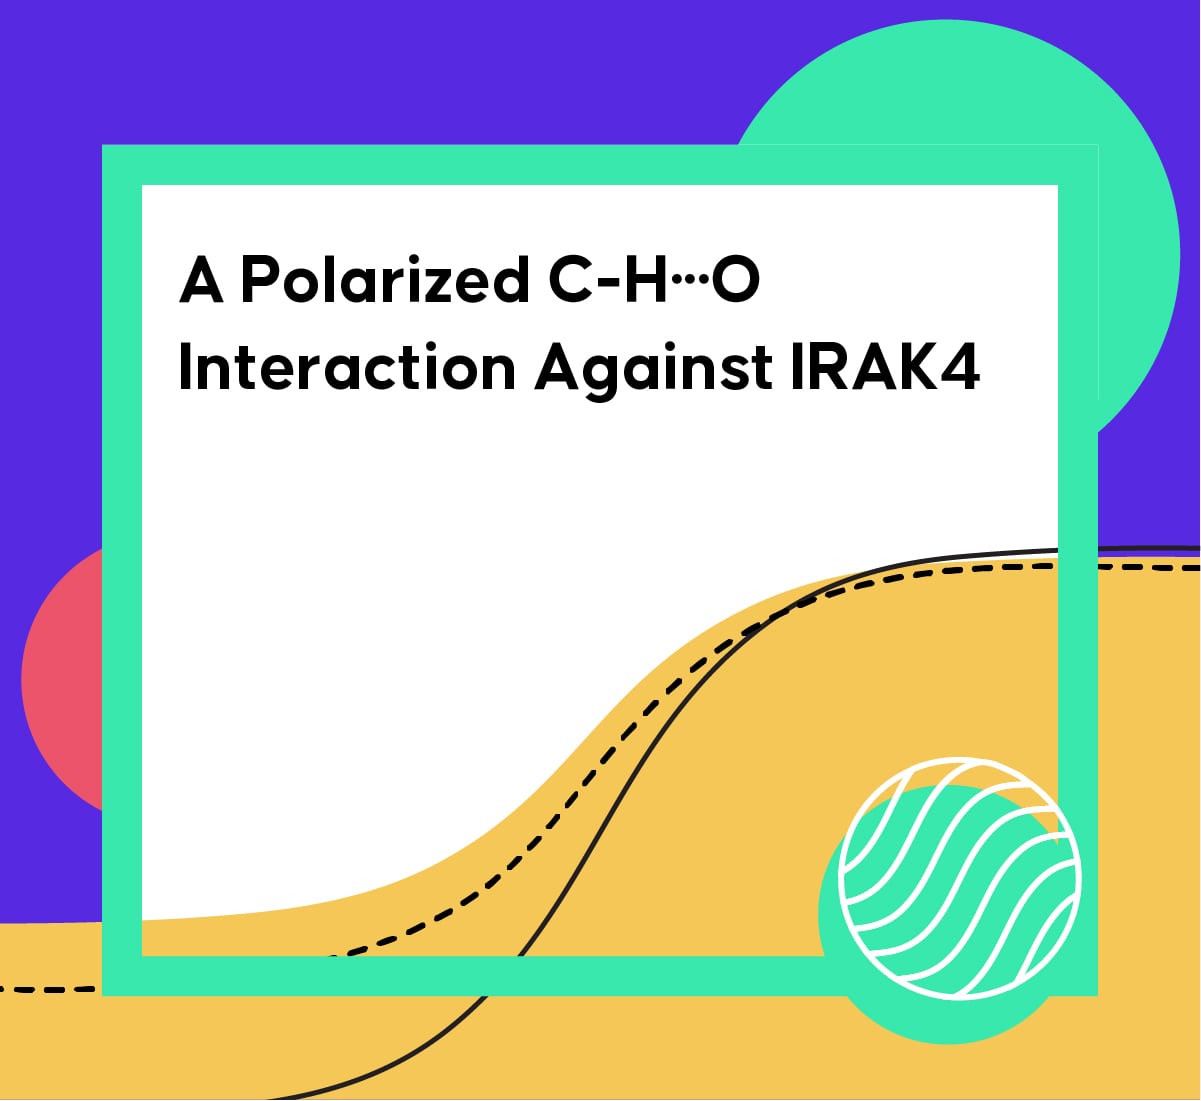 Cover image of Drug Hunter article "A Polarized C-H···O Interaction Against IRAK4"